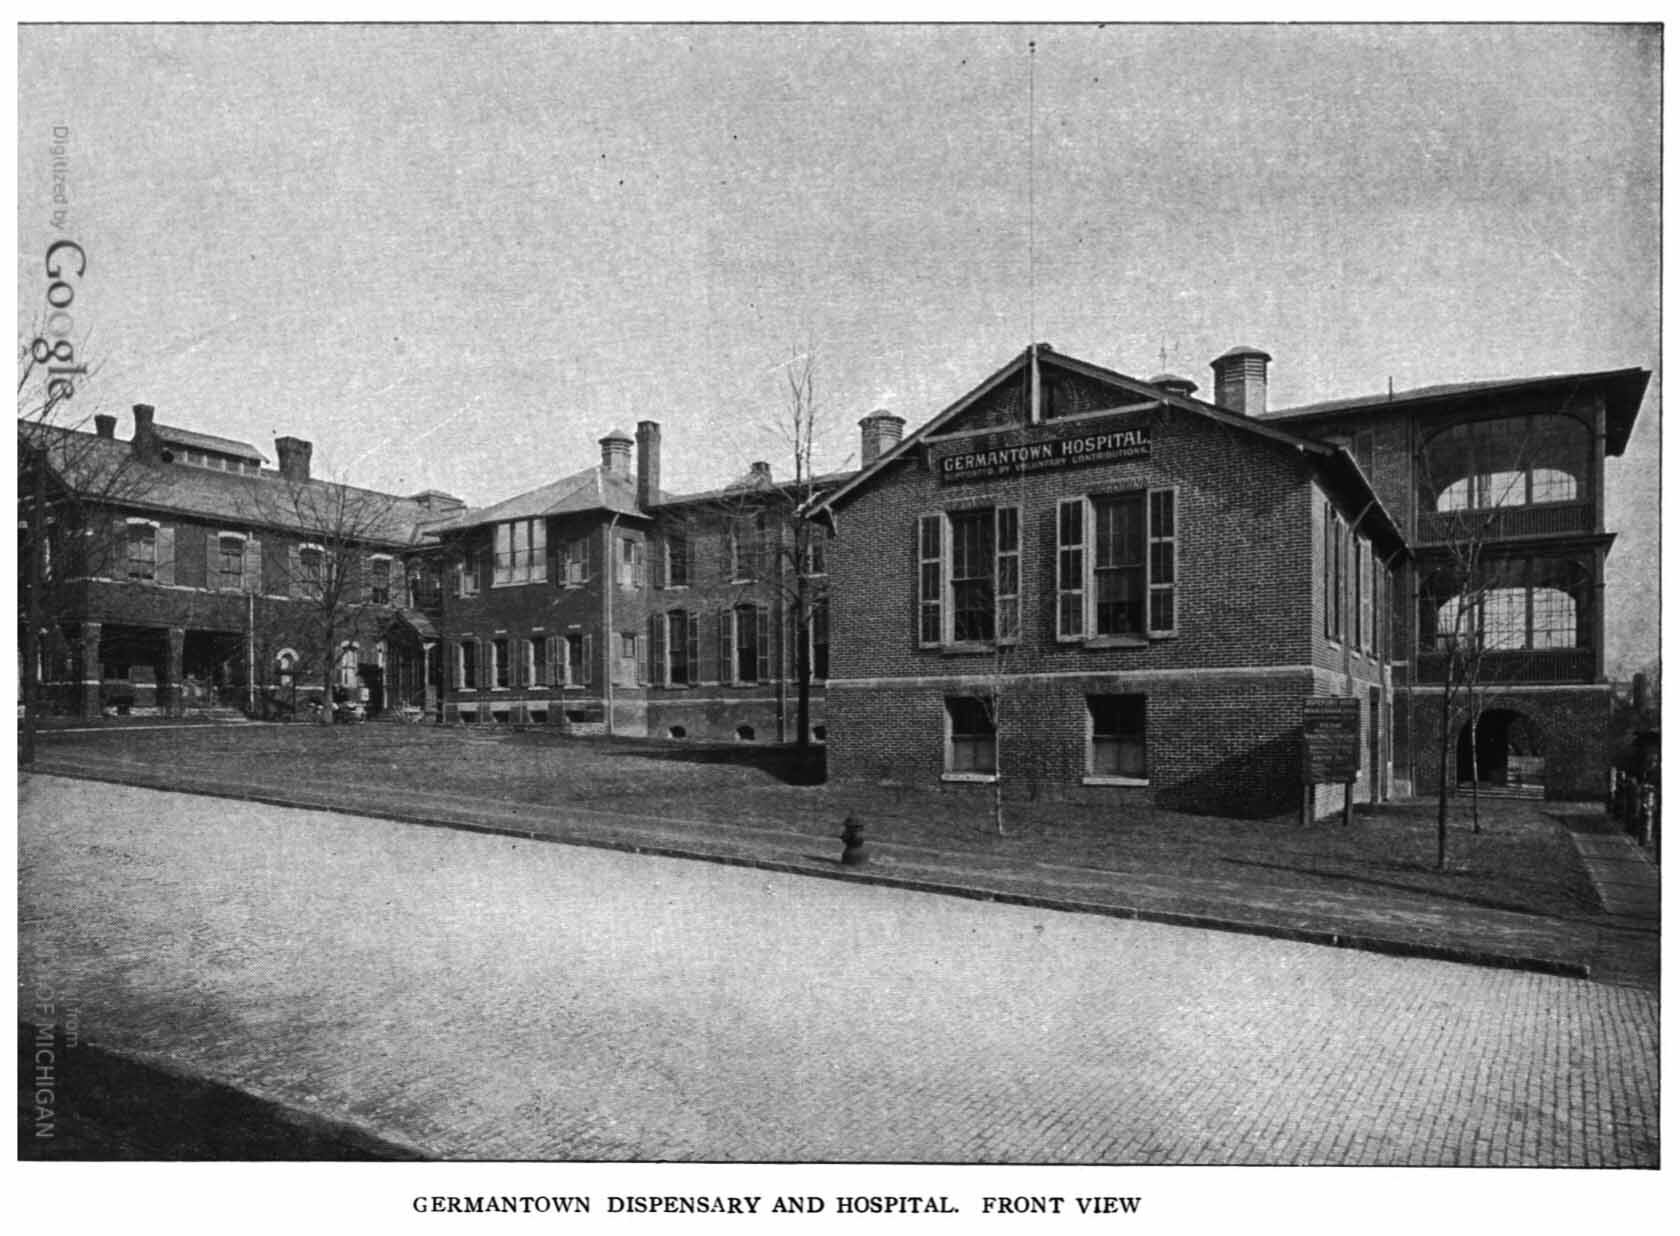  Figure 10: The Germantown Hospital and Dispensary Building. (University of Michigan) 